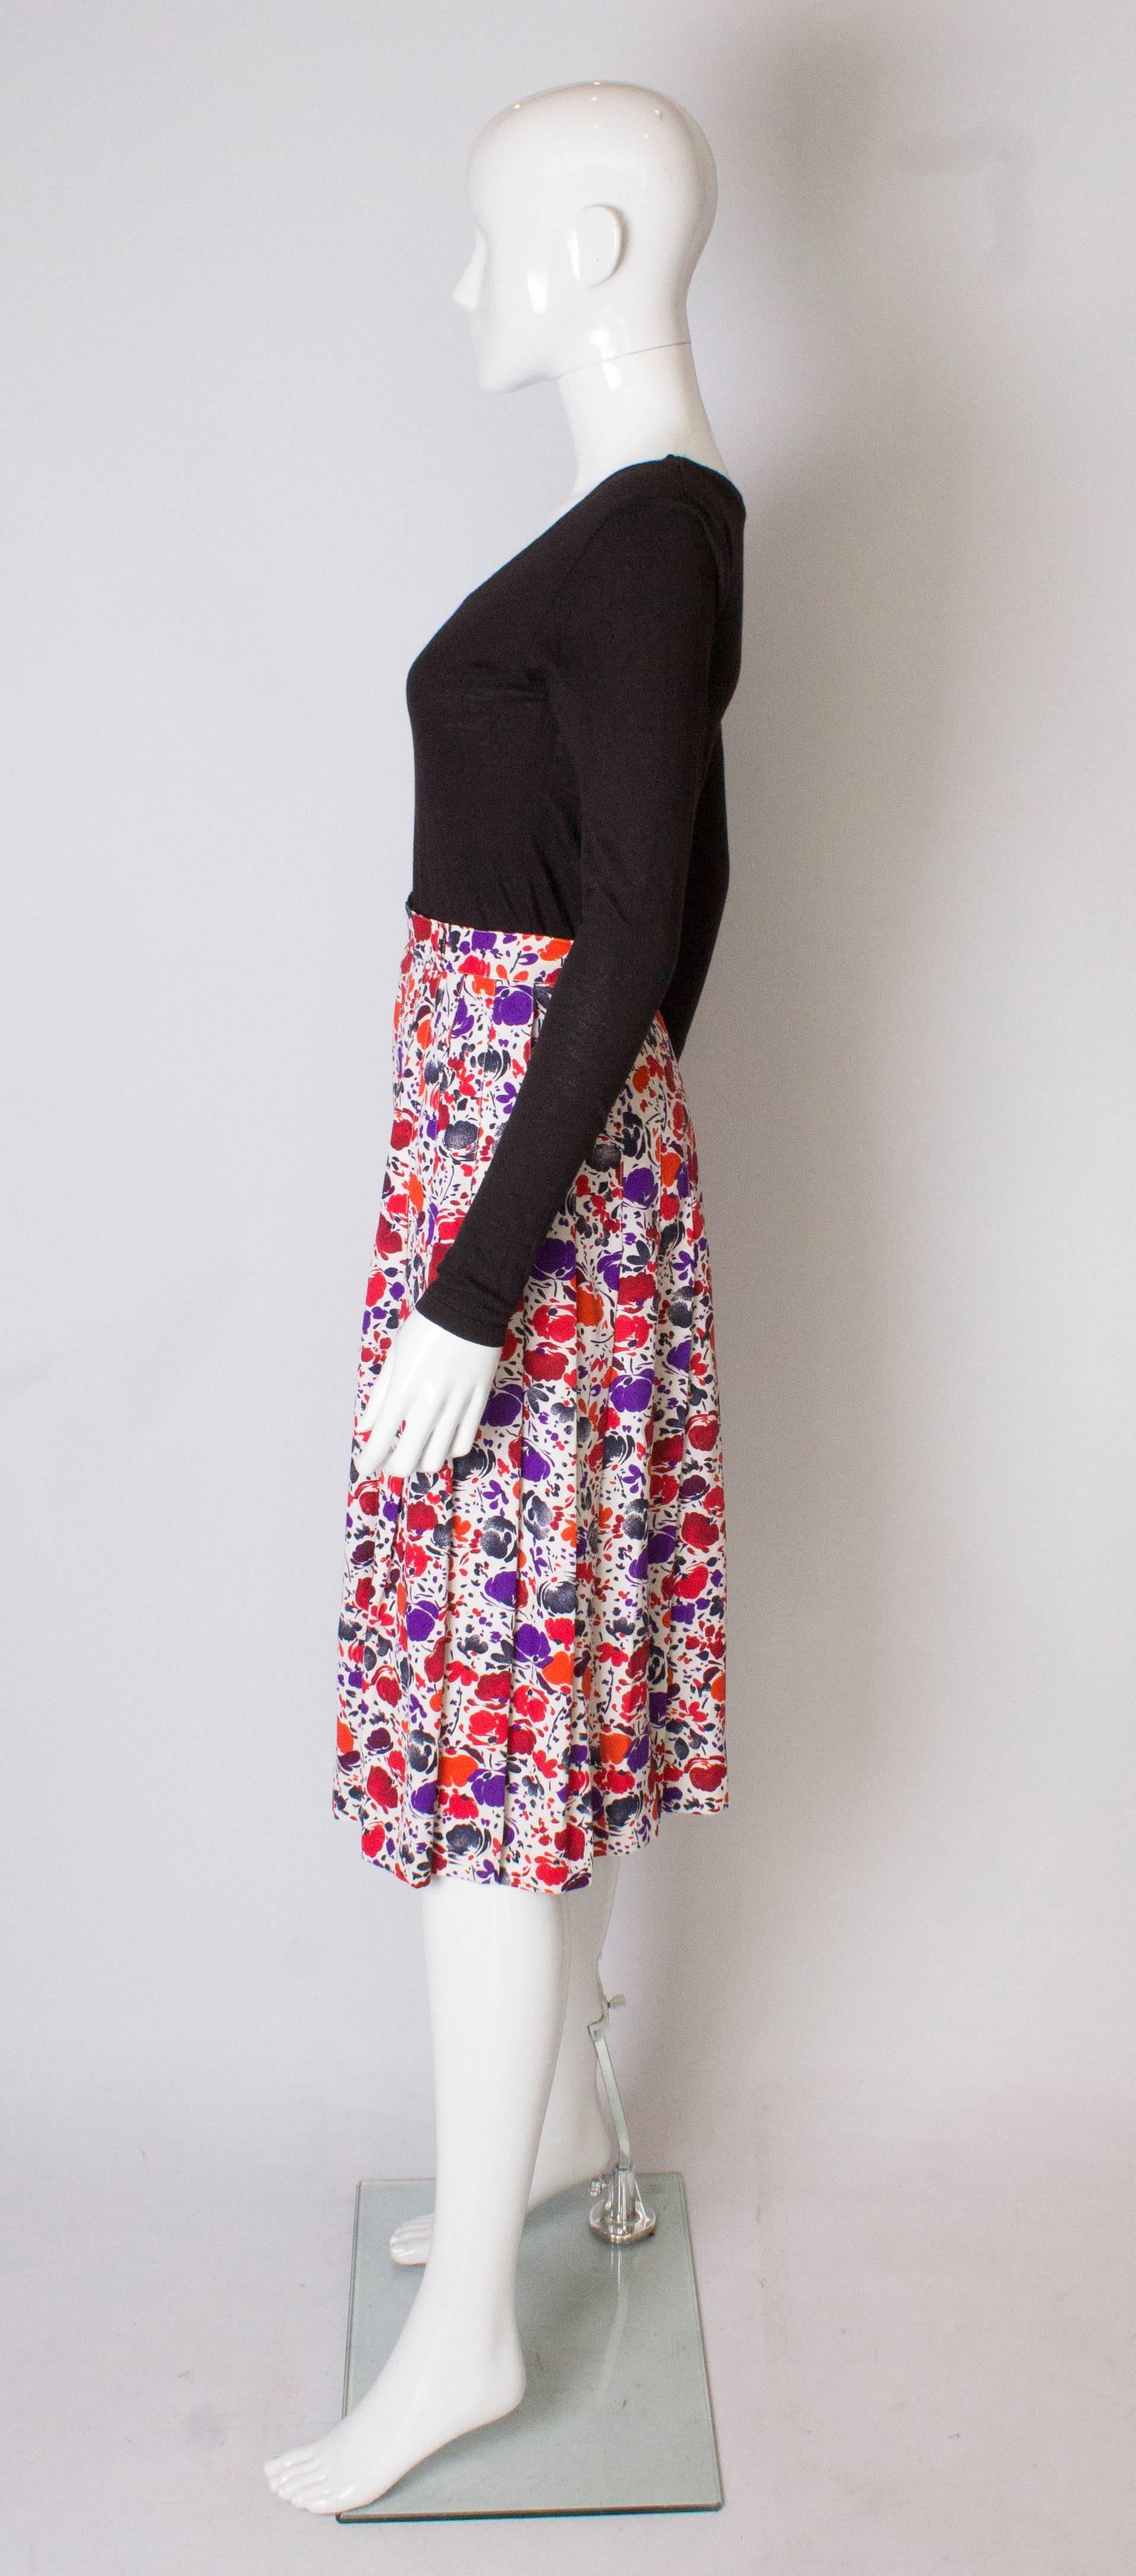 Women's A vintage 1980s floral printed pleated numbered Skirt by Jean Louis Scherer